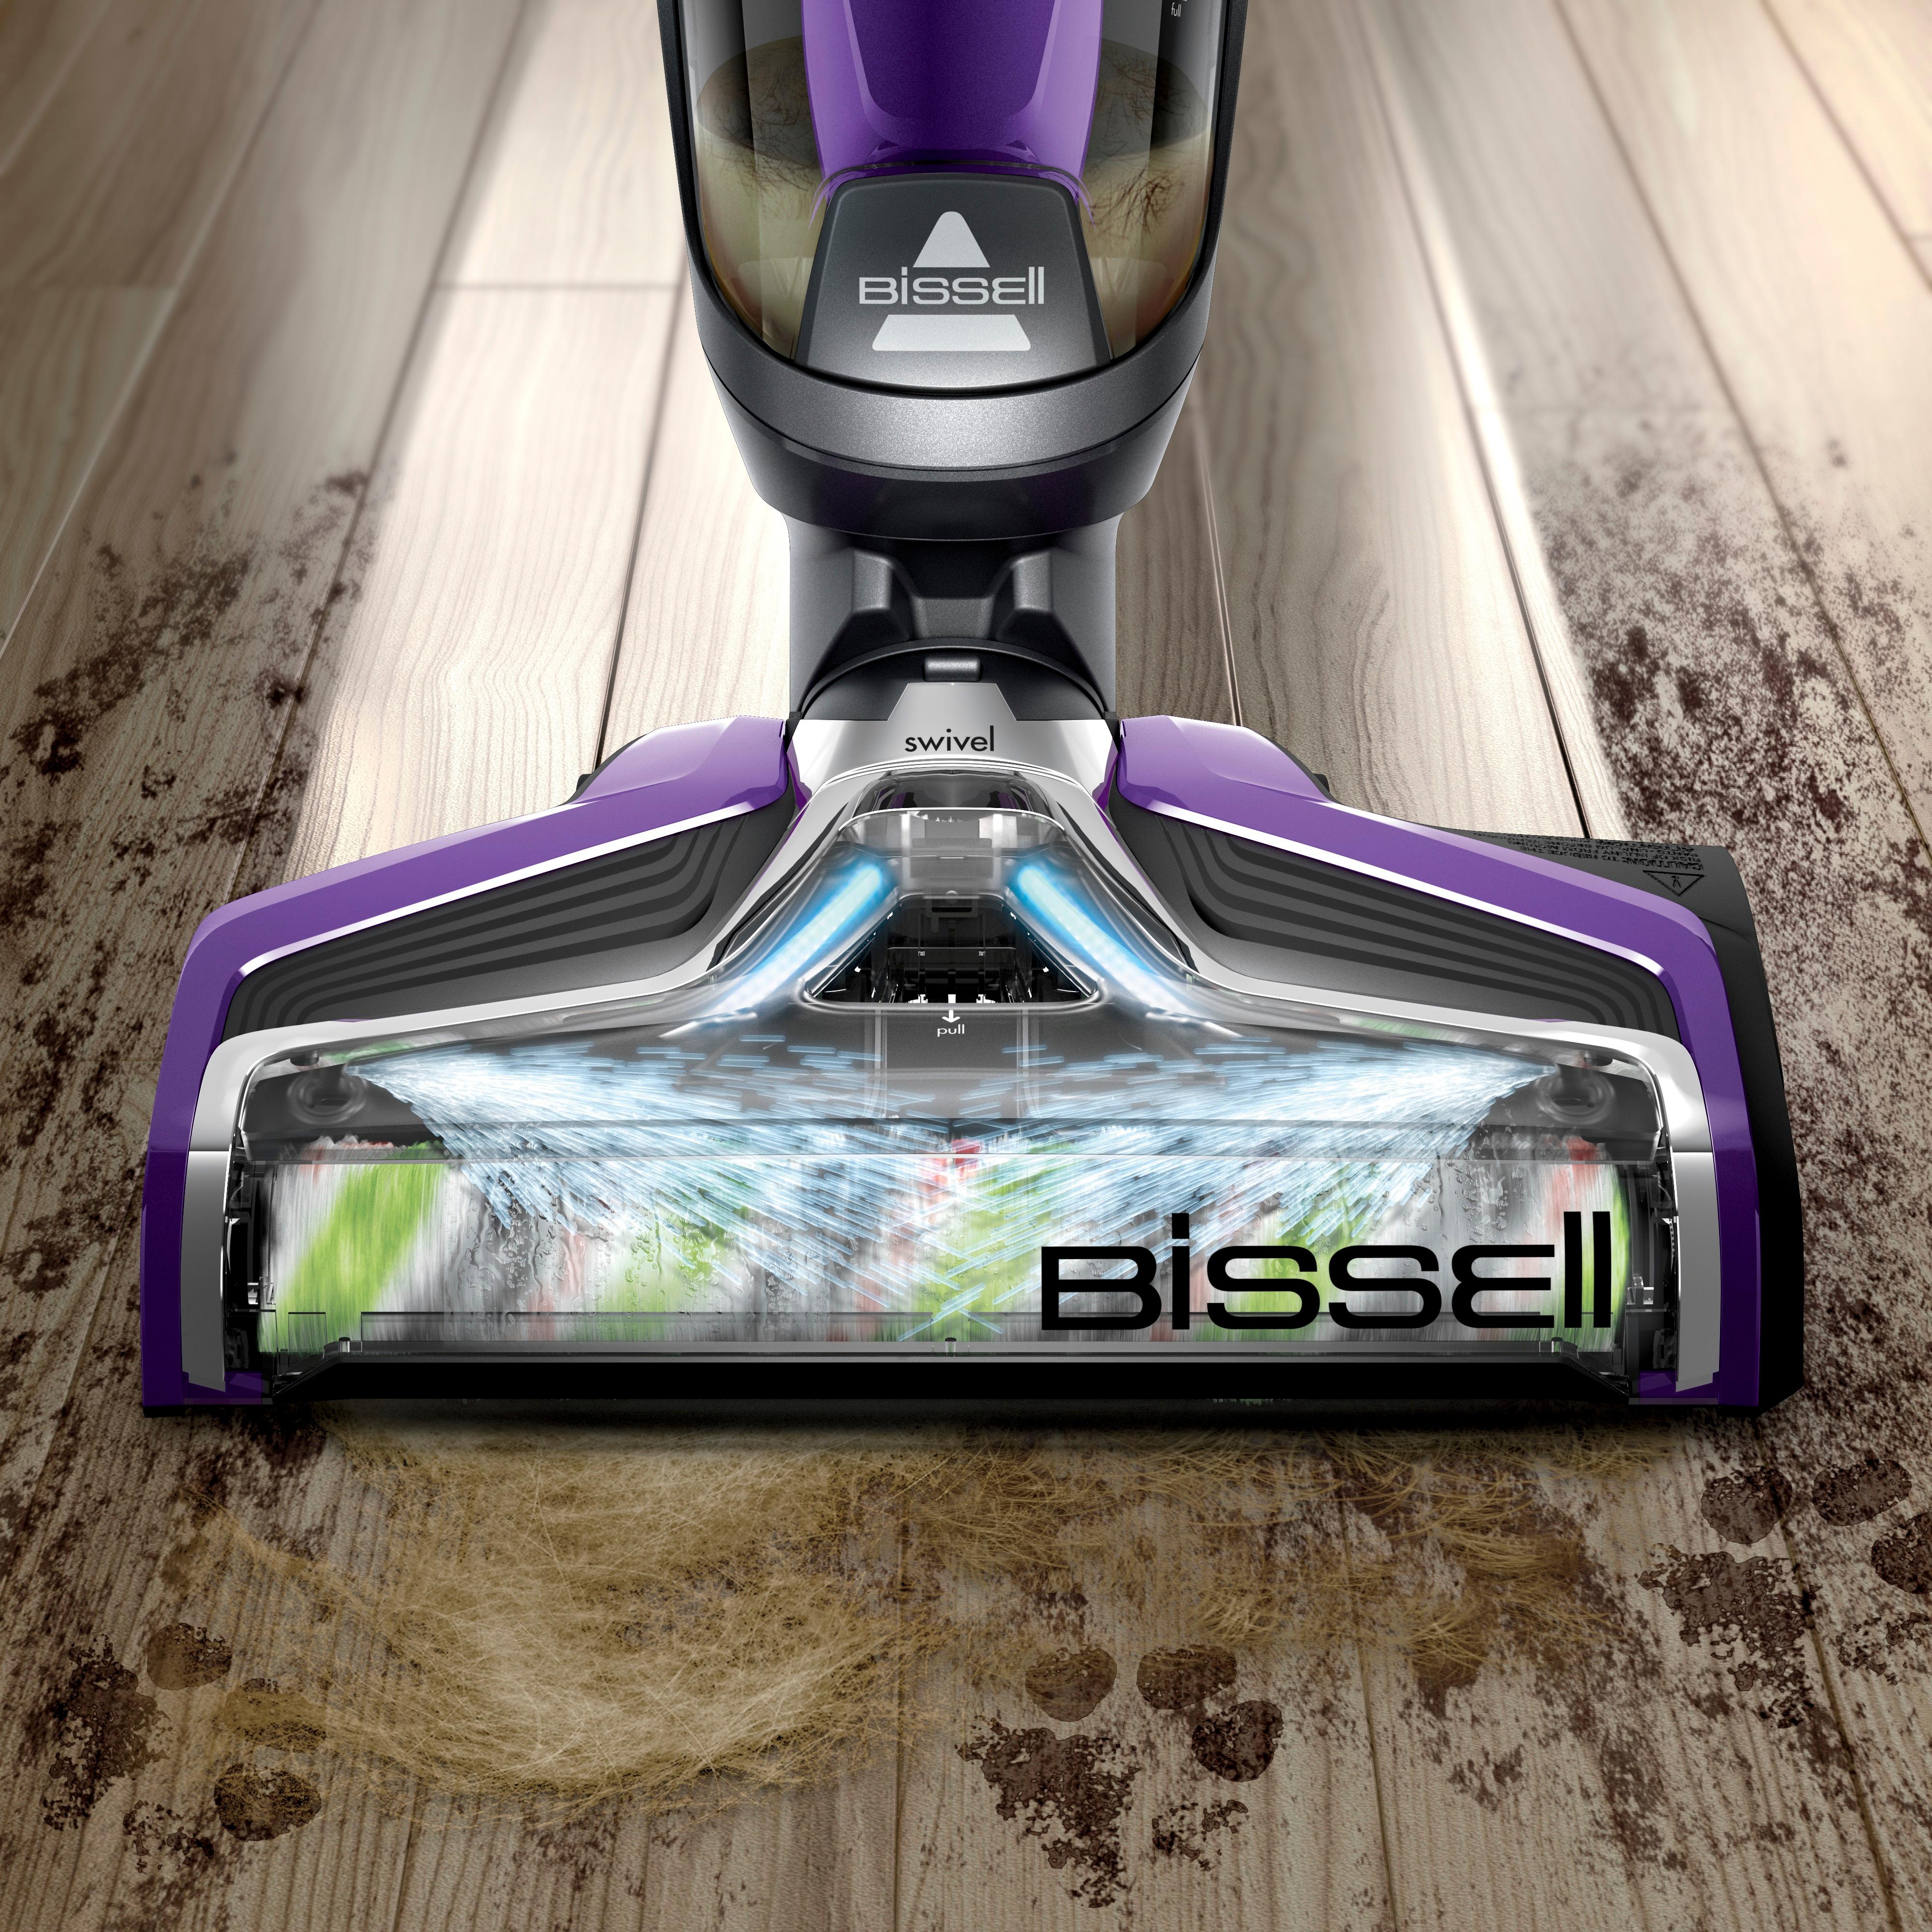 BISSELL CrossWave Pet Pro All-in-One Multi-Surface Cleaner Grapevine Purple  and Sparkle Silver 2306 - Best Buy